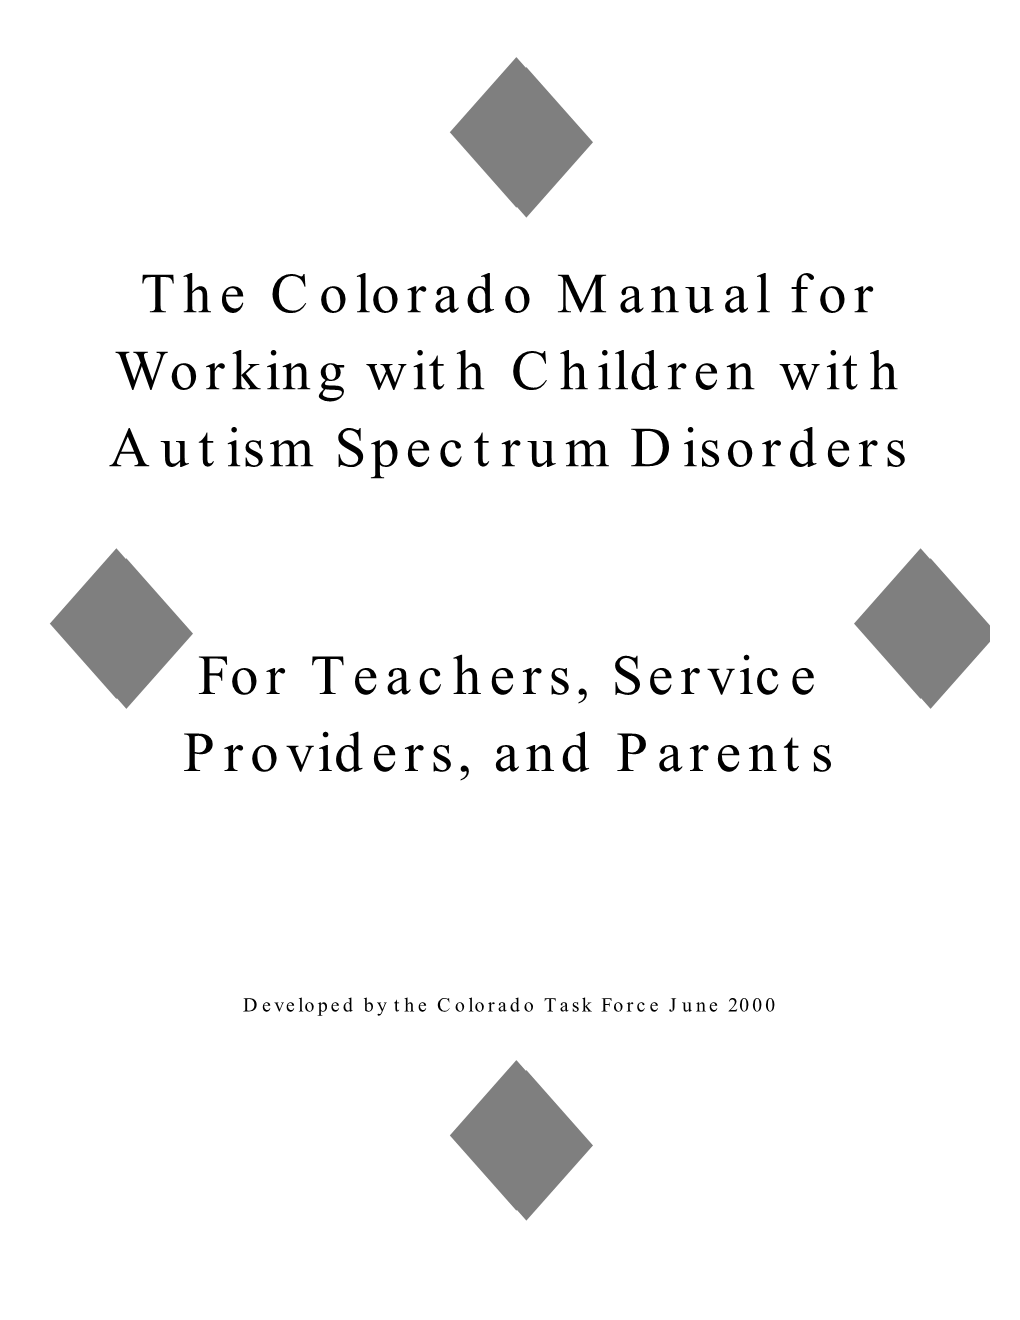 The Colorado Manual for Working with Children with Autism Spectrum Disorders for Teachers, Service Providers, and Parents